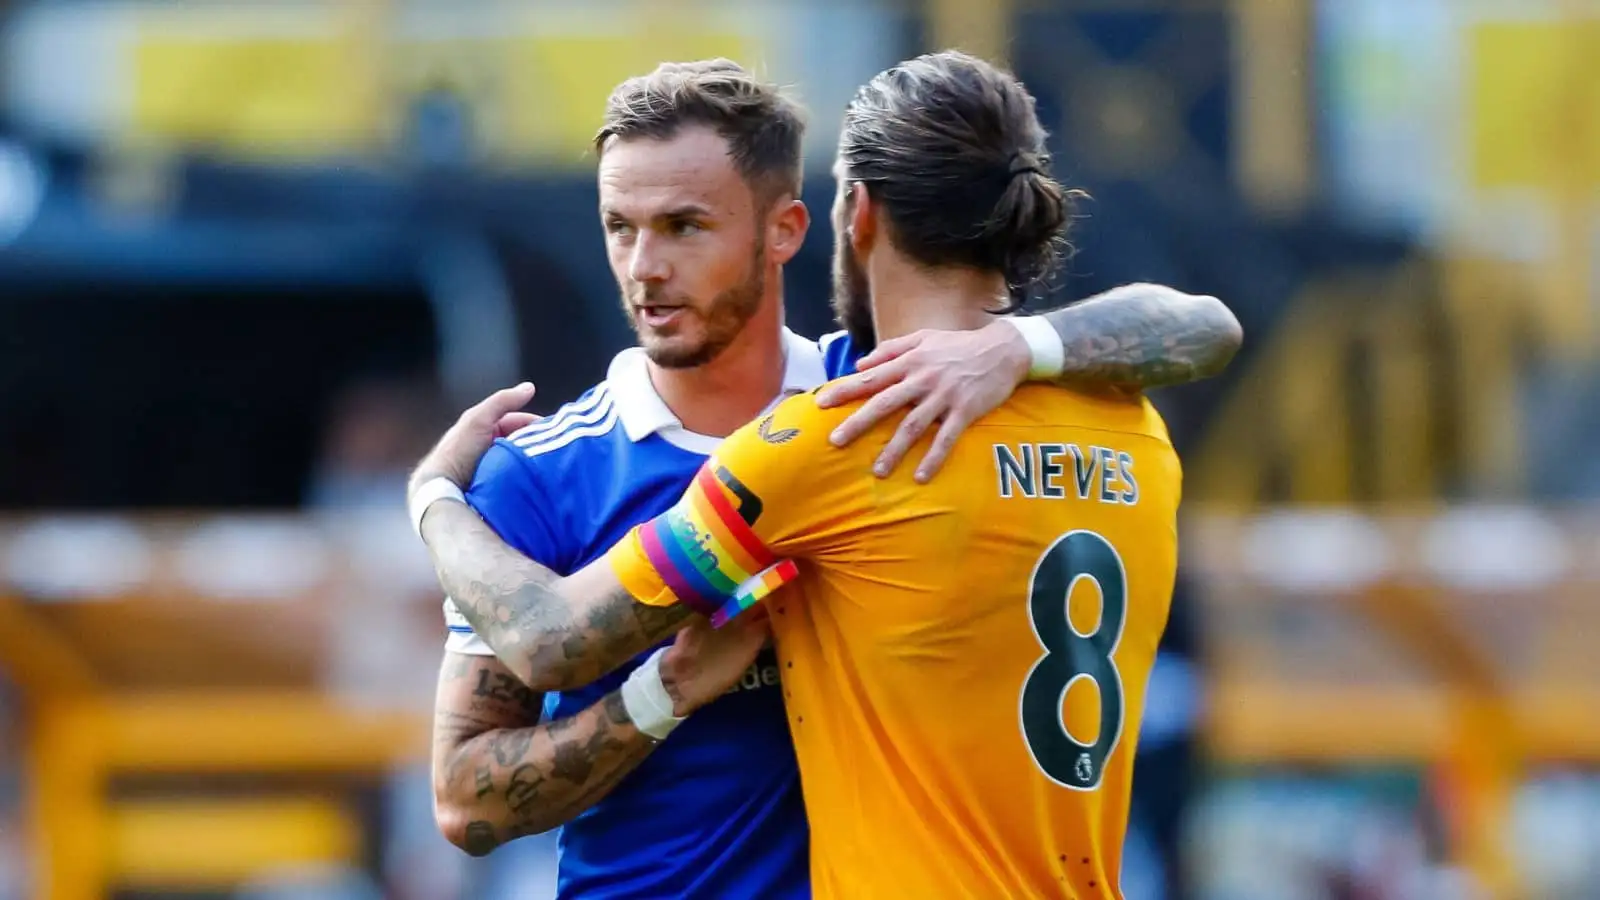 Leicester playmaker James Maddison and Wolves midfielder Ruben Neves